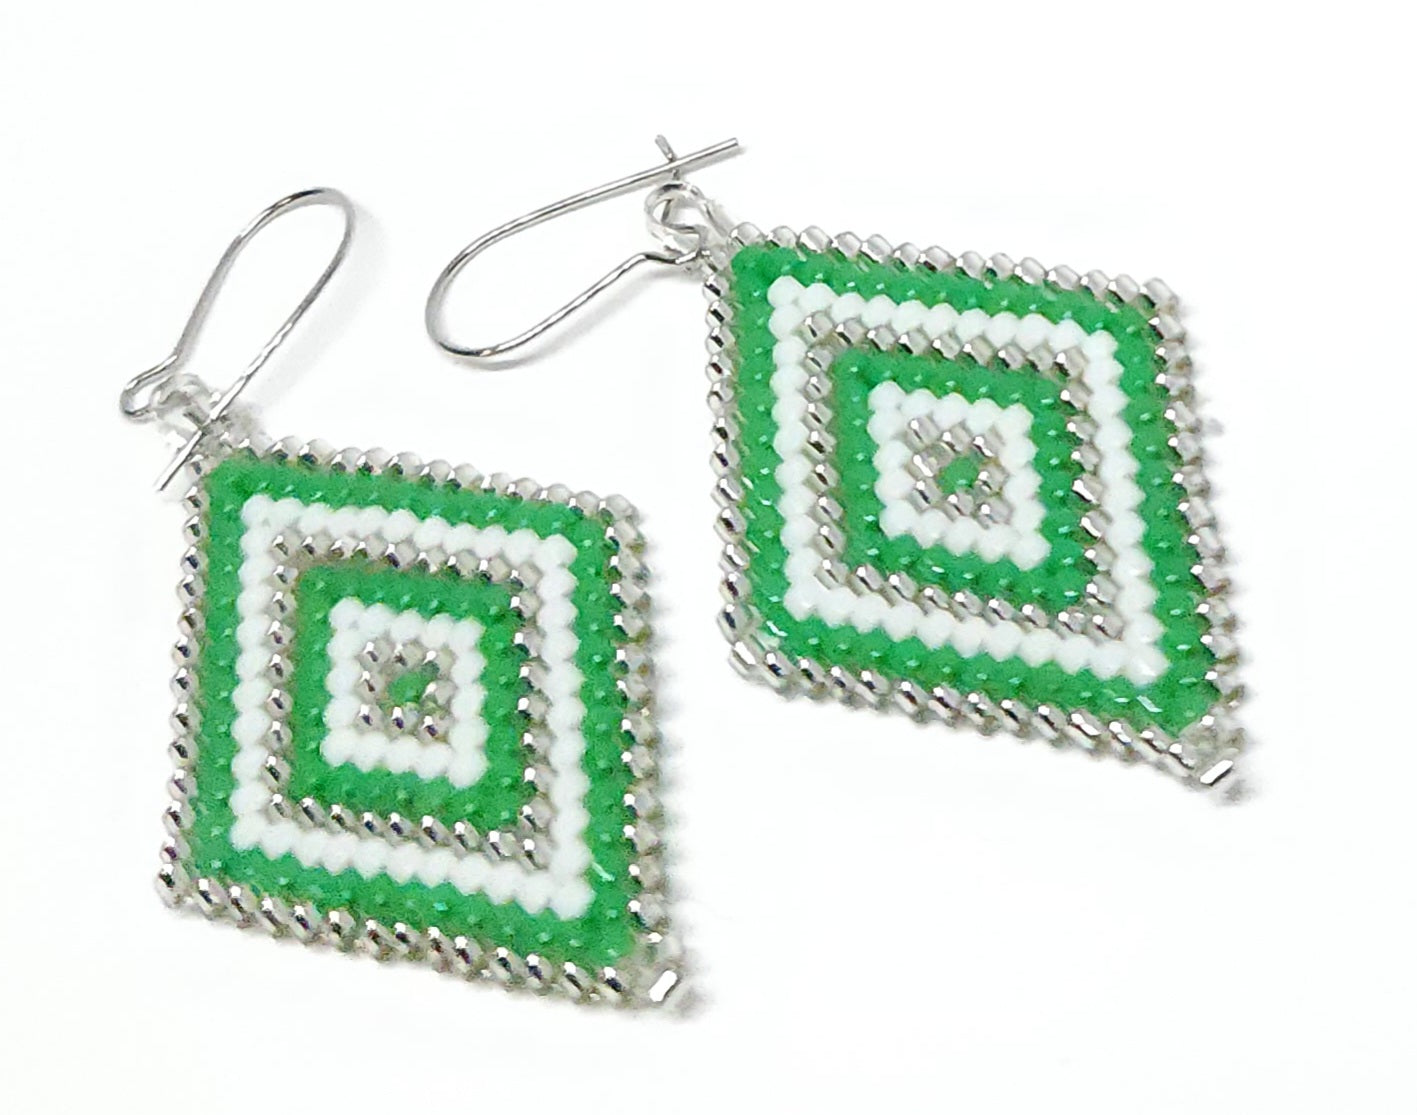 Green Brick stitch Dangles with surgical stainless steel hooks